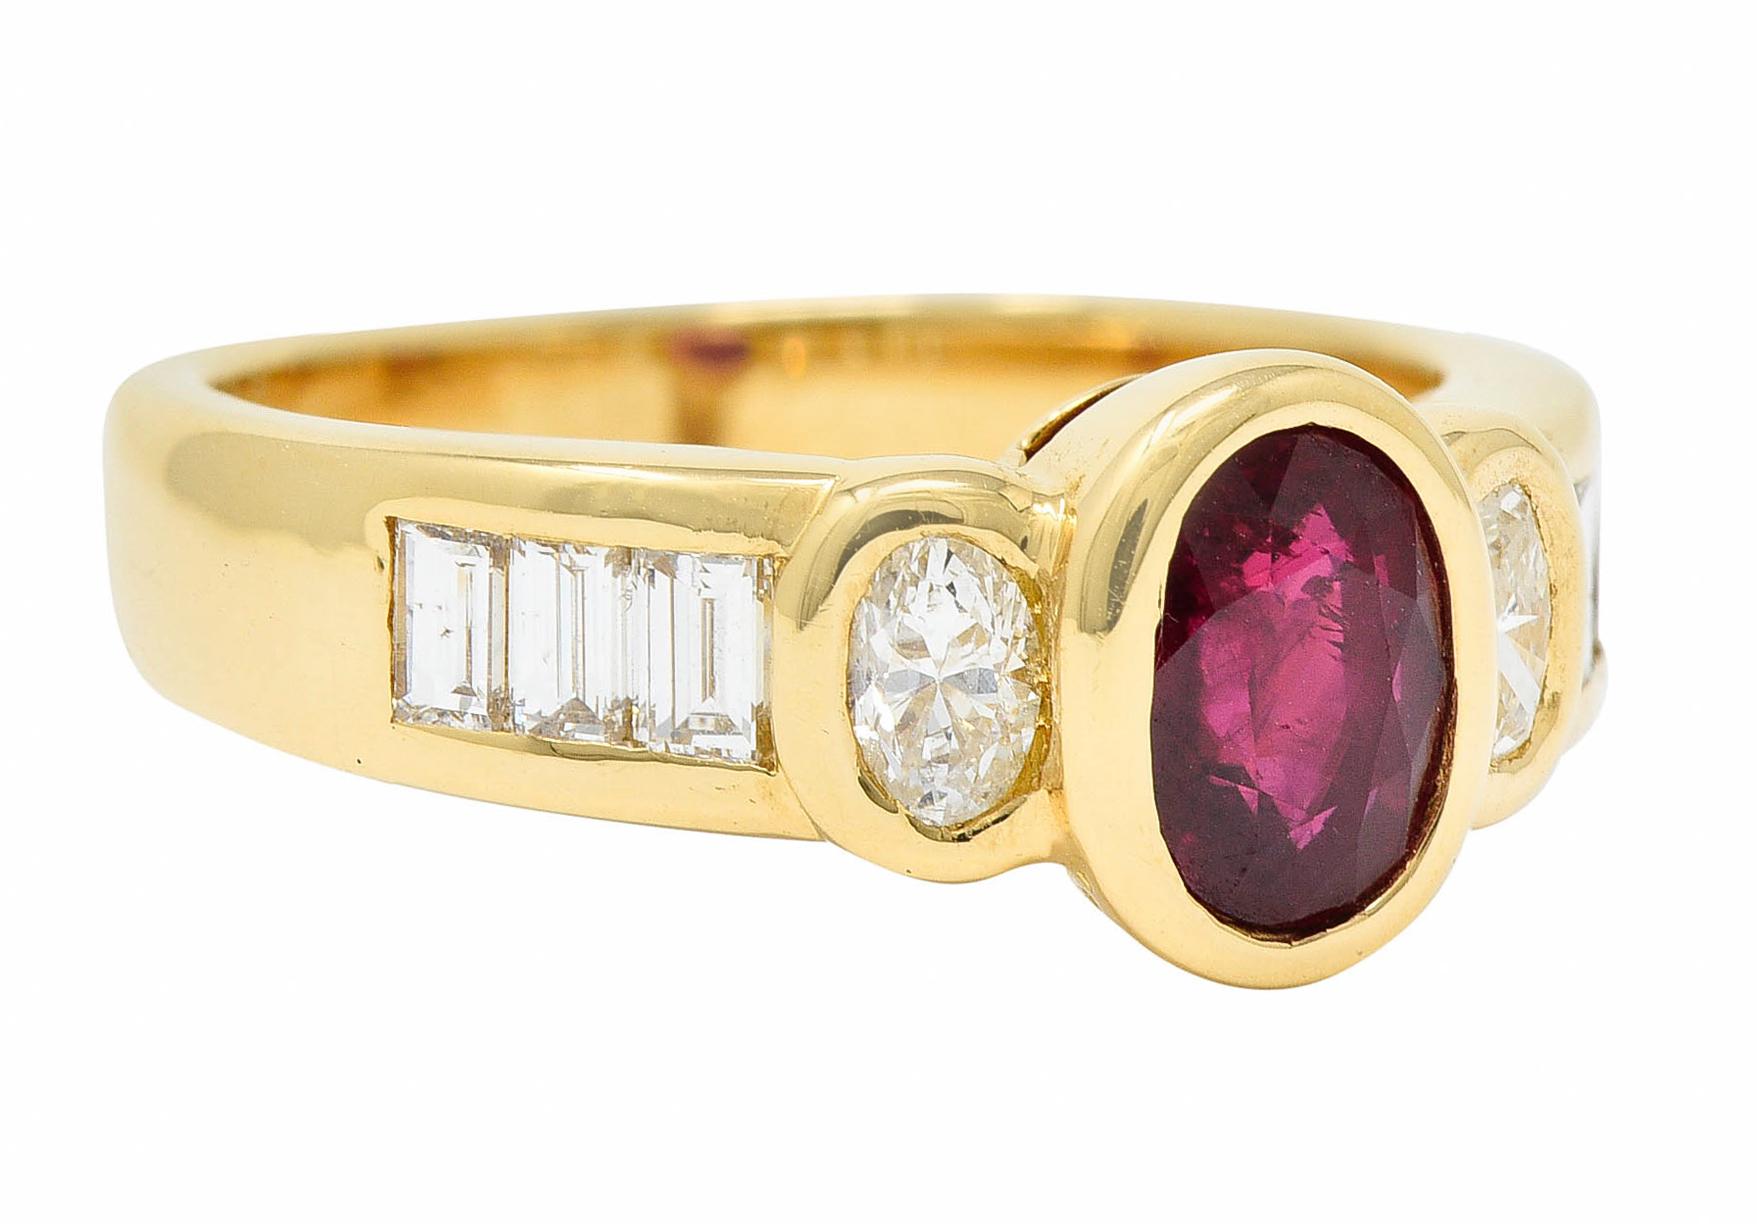 Centering an oval cut ruby weighing approximately 1.10 carats - bright red in color

Bezel set and flanked by two bezel set oval cut diamonds - K/L color

Shoulders are channel set with baguette cut diamonds - G to J color

Total diamond weight is